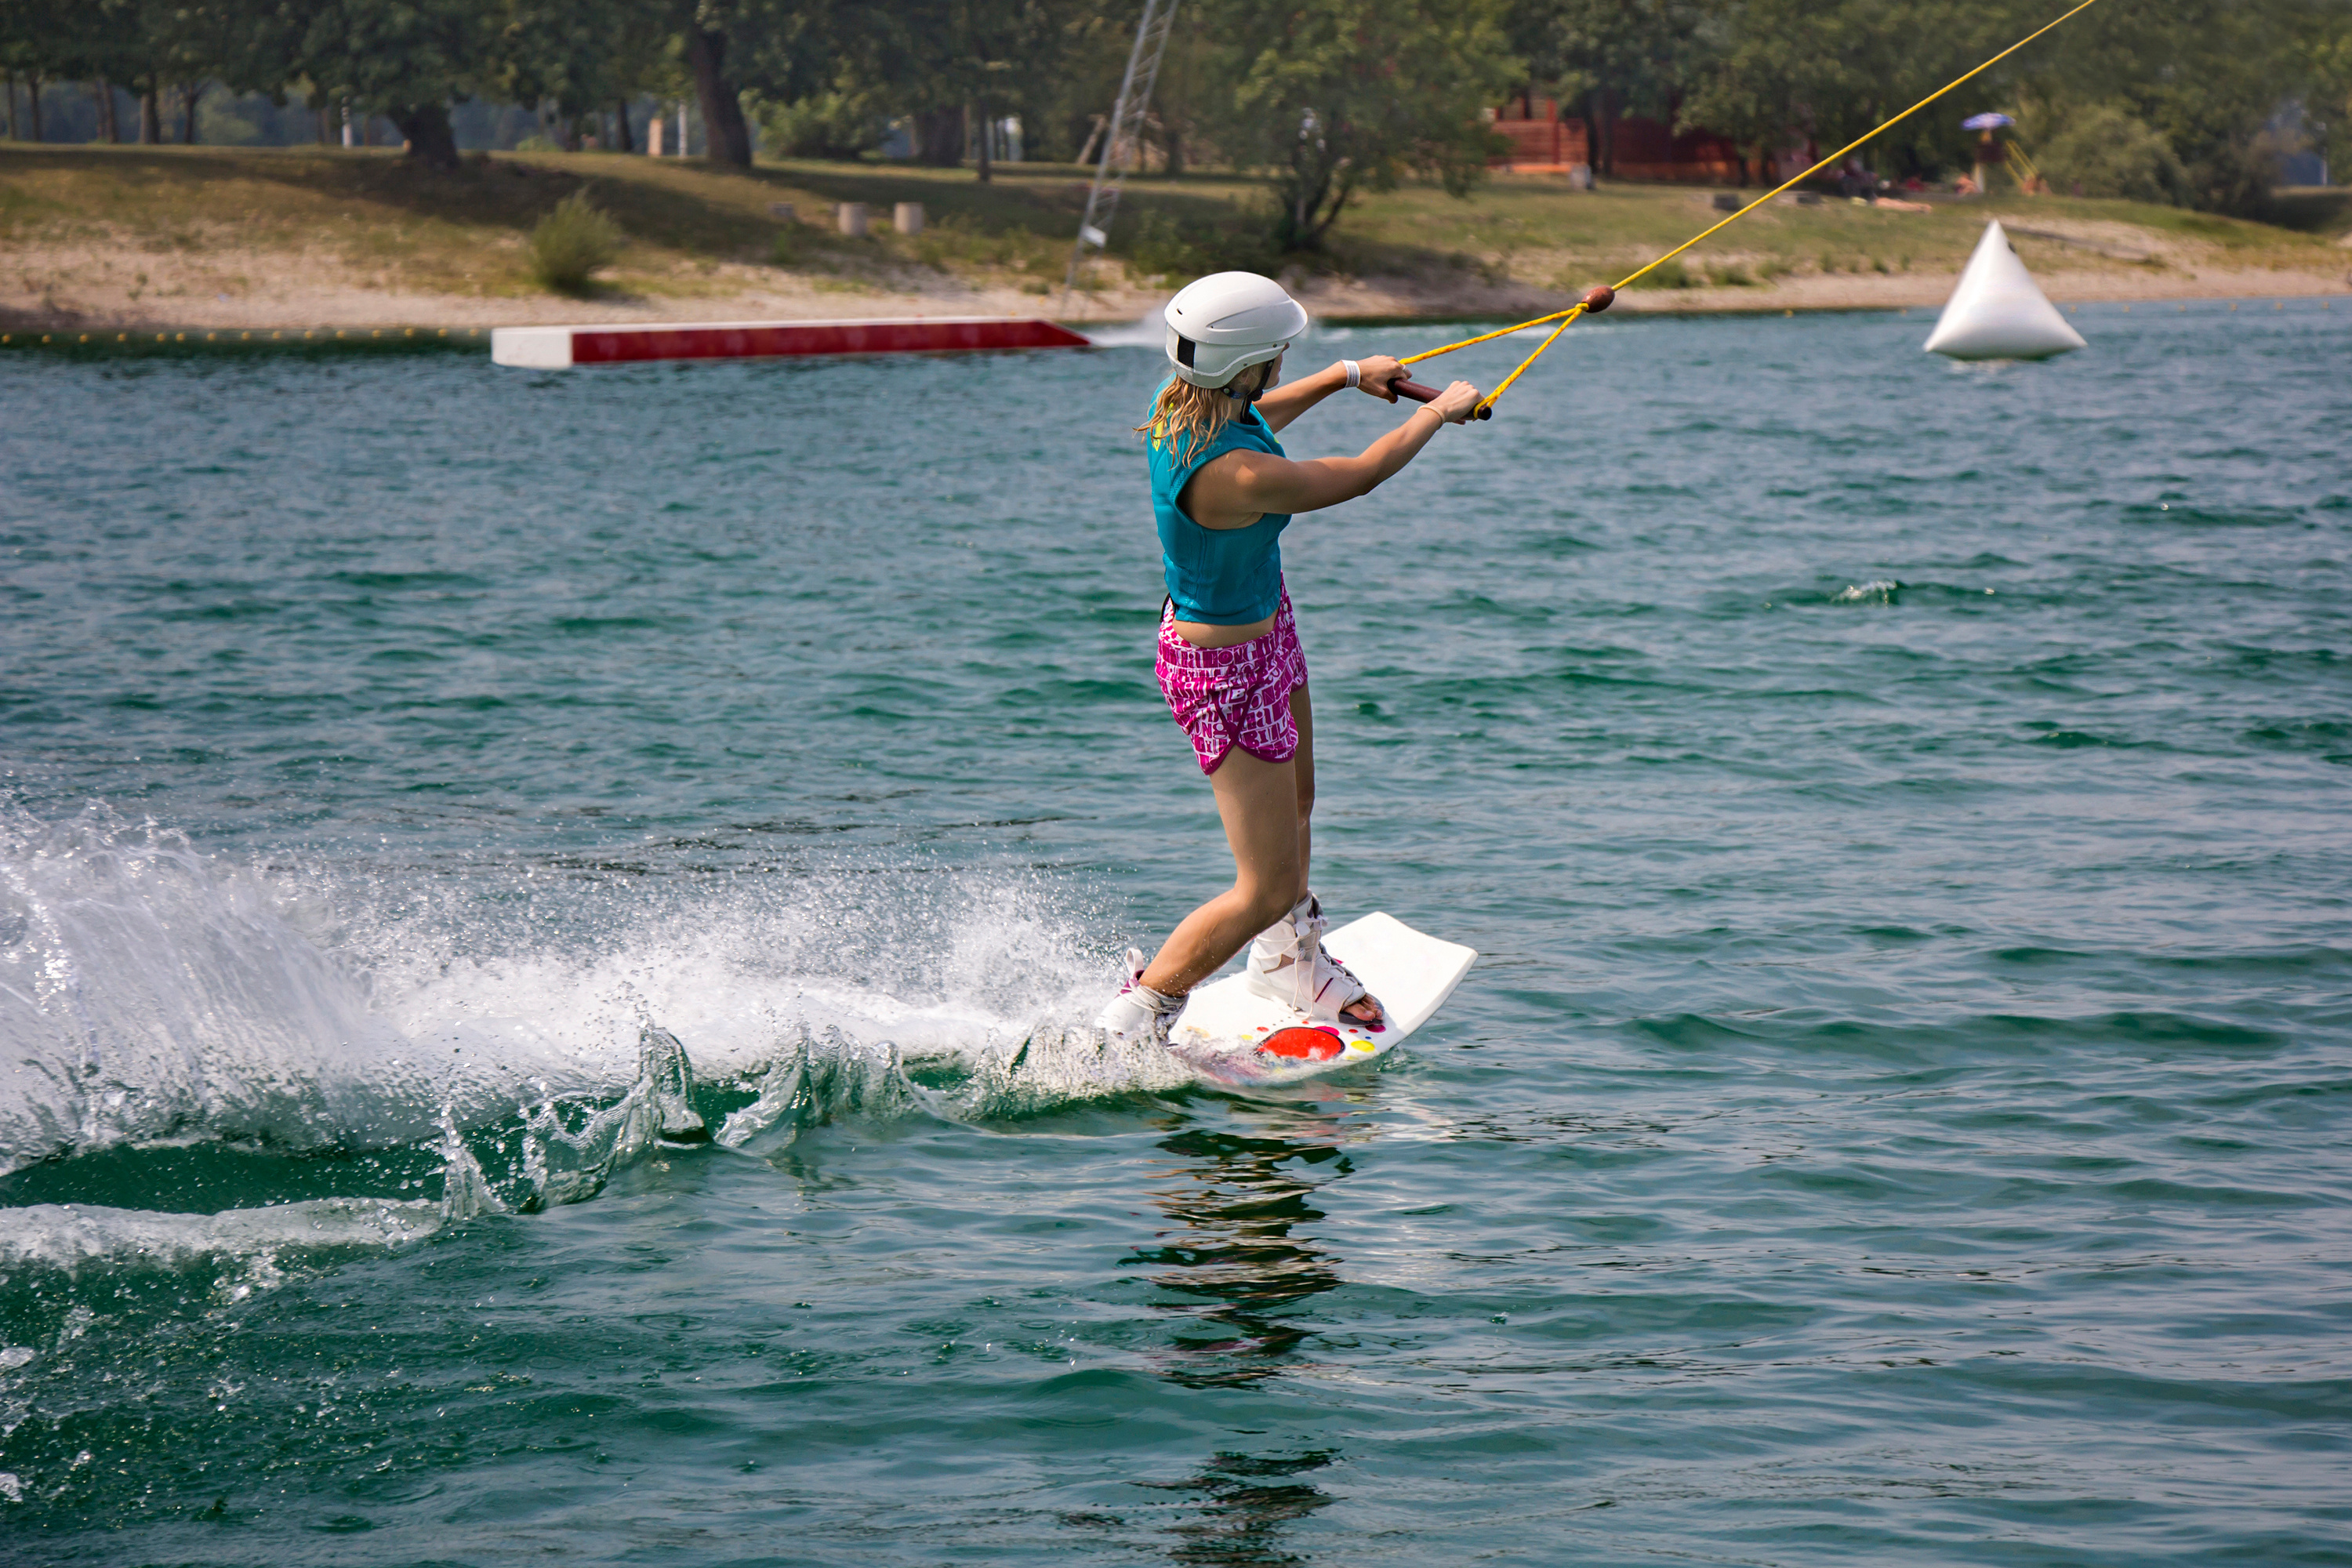 Young Girl Wakeboarder